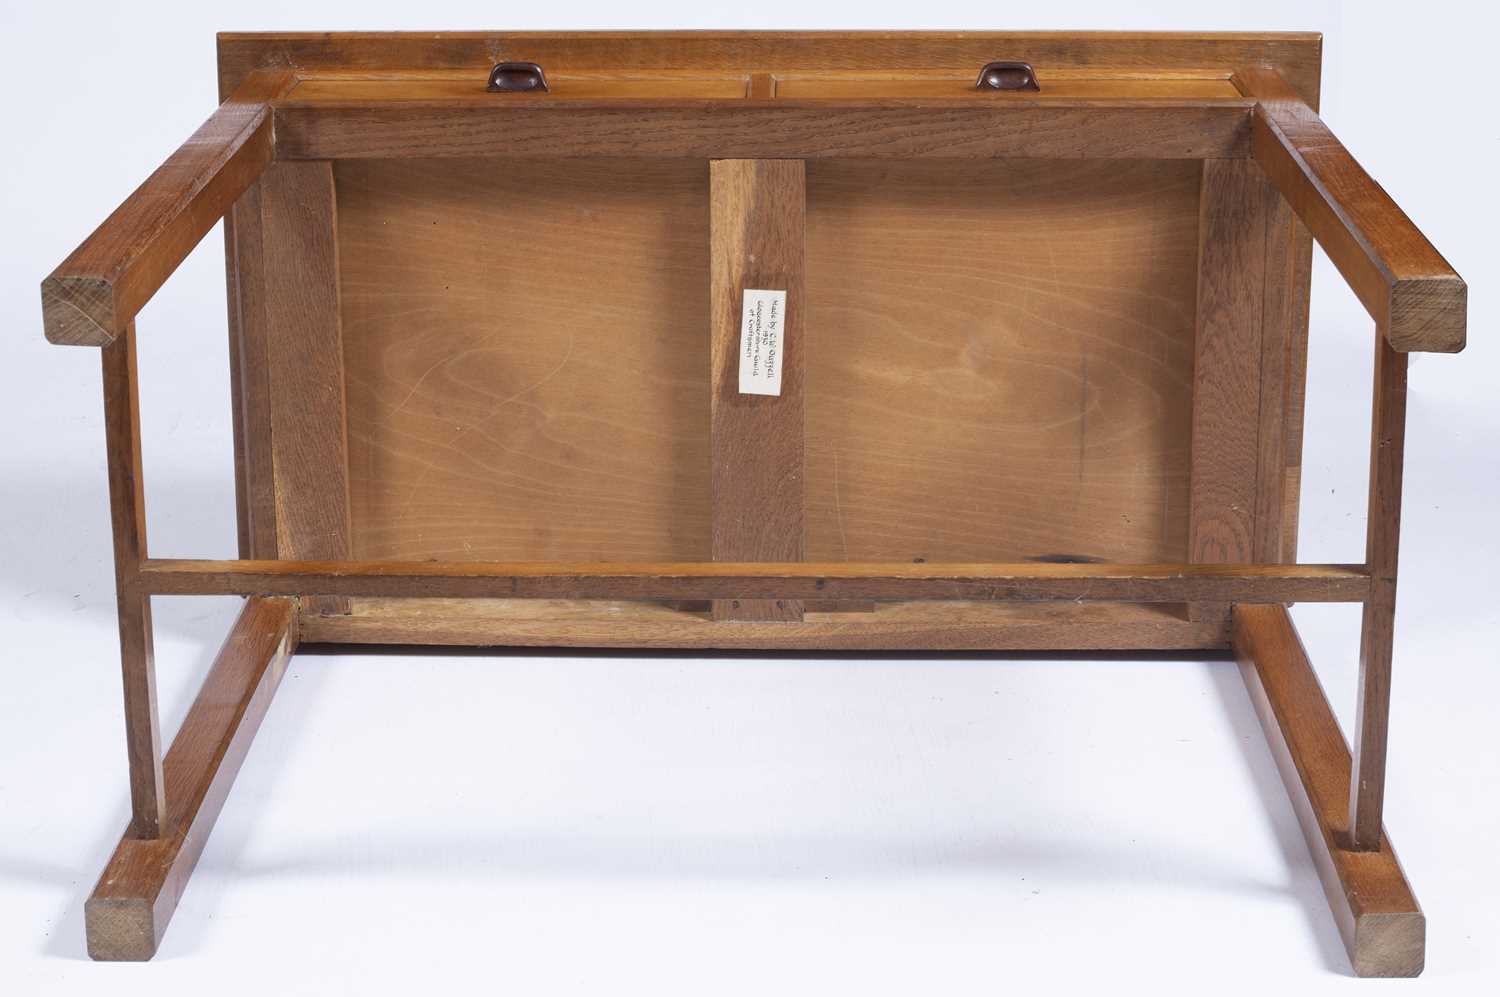 Attributed to C. W. Ouzzel for the Gloucestershire Guild of Craftsmen Cotswold School oak desk, - Image 6 of 7